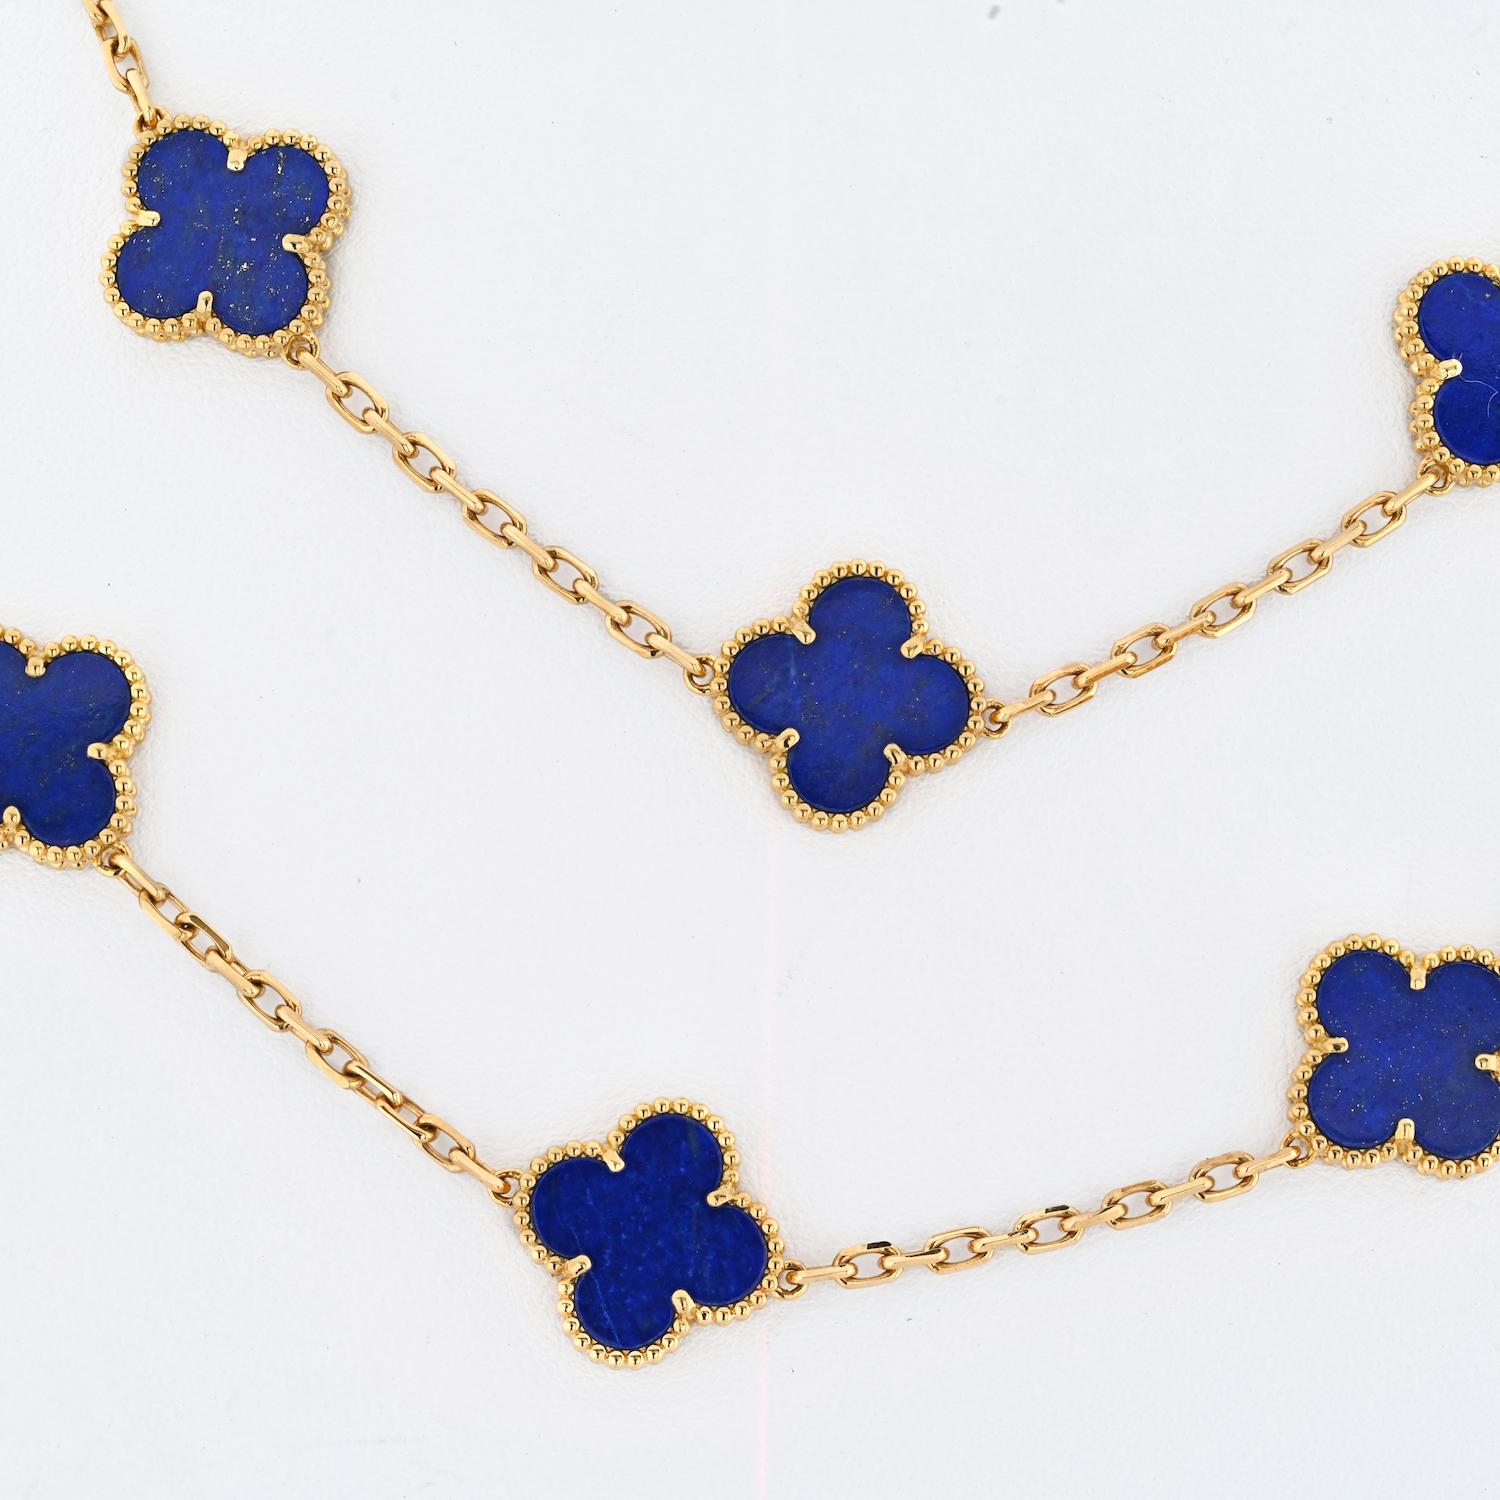 Van Cleef & Arpels 18K Yellow Gold 20 Motif Lapis Alhambra Chain Necklace. Circa 2018. 

Very rare and highly desirable Van Cleef & Arpels 18k yellow gold vintage Alhambra 20 motif lapis lazuli necklace. It is in perfect condition in VCA box. 

The